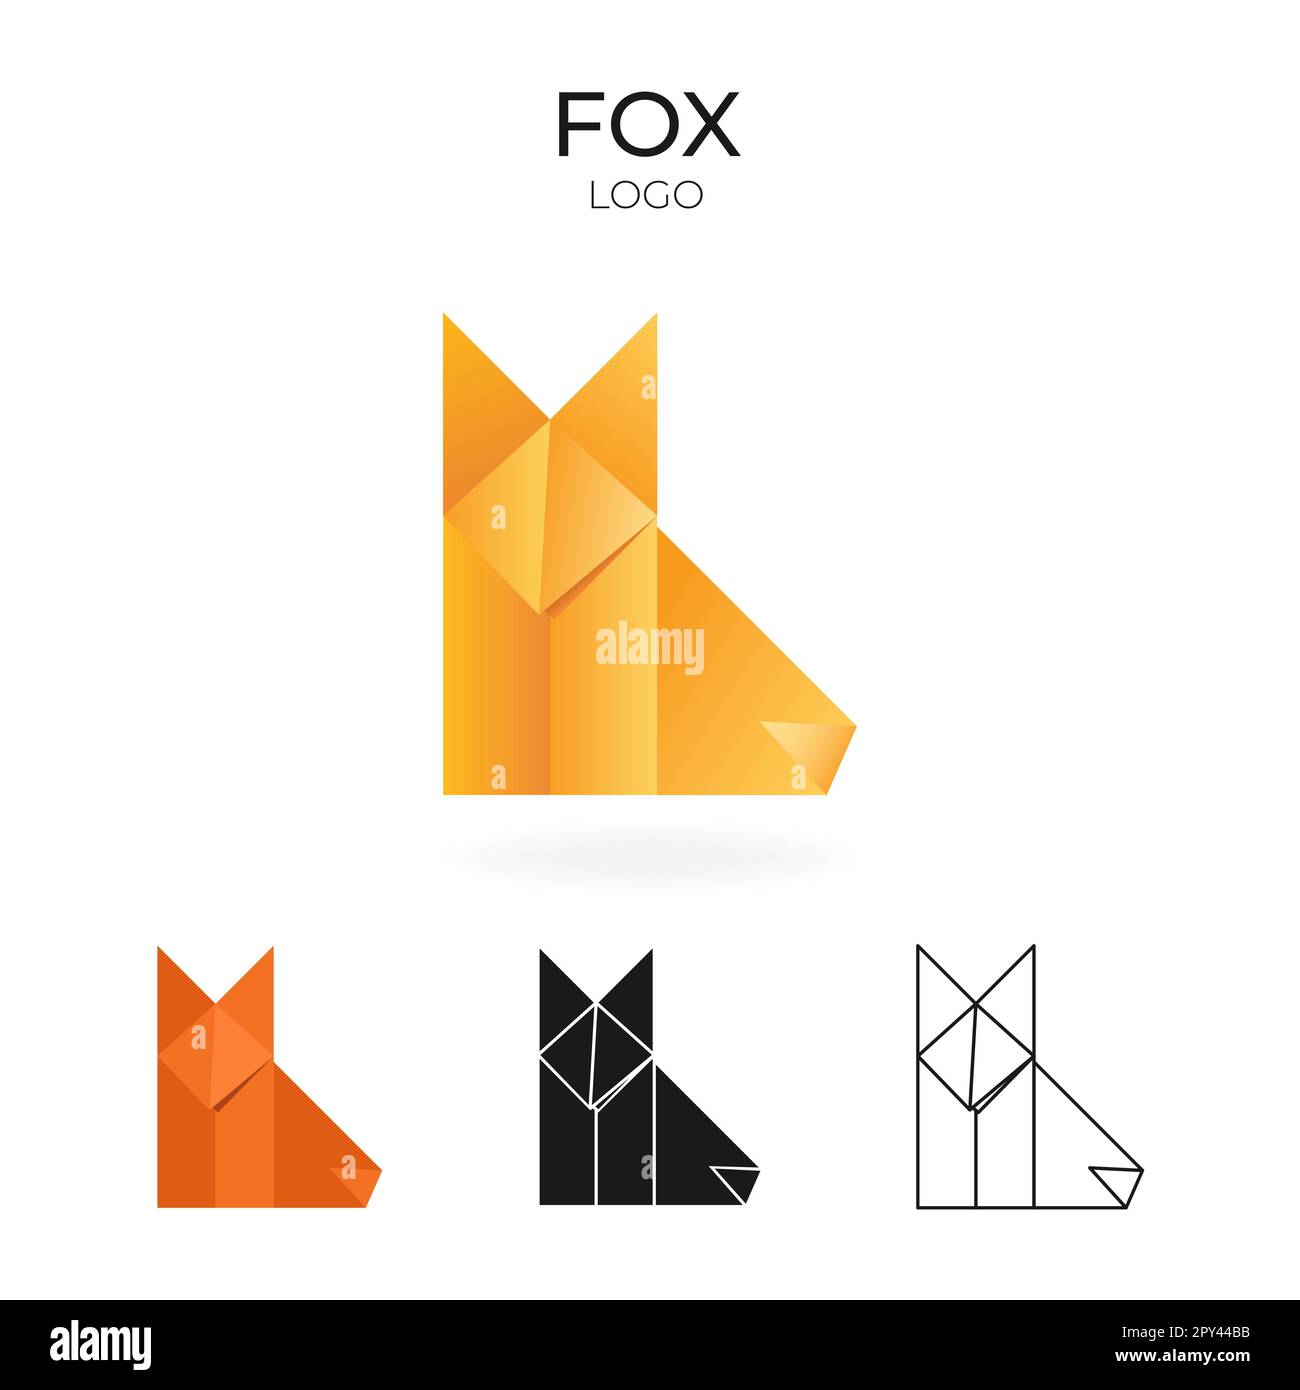 Origami vector logo and icon with fox.  Stock Vector